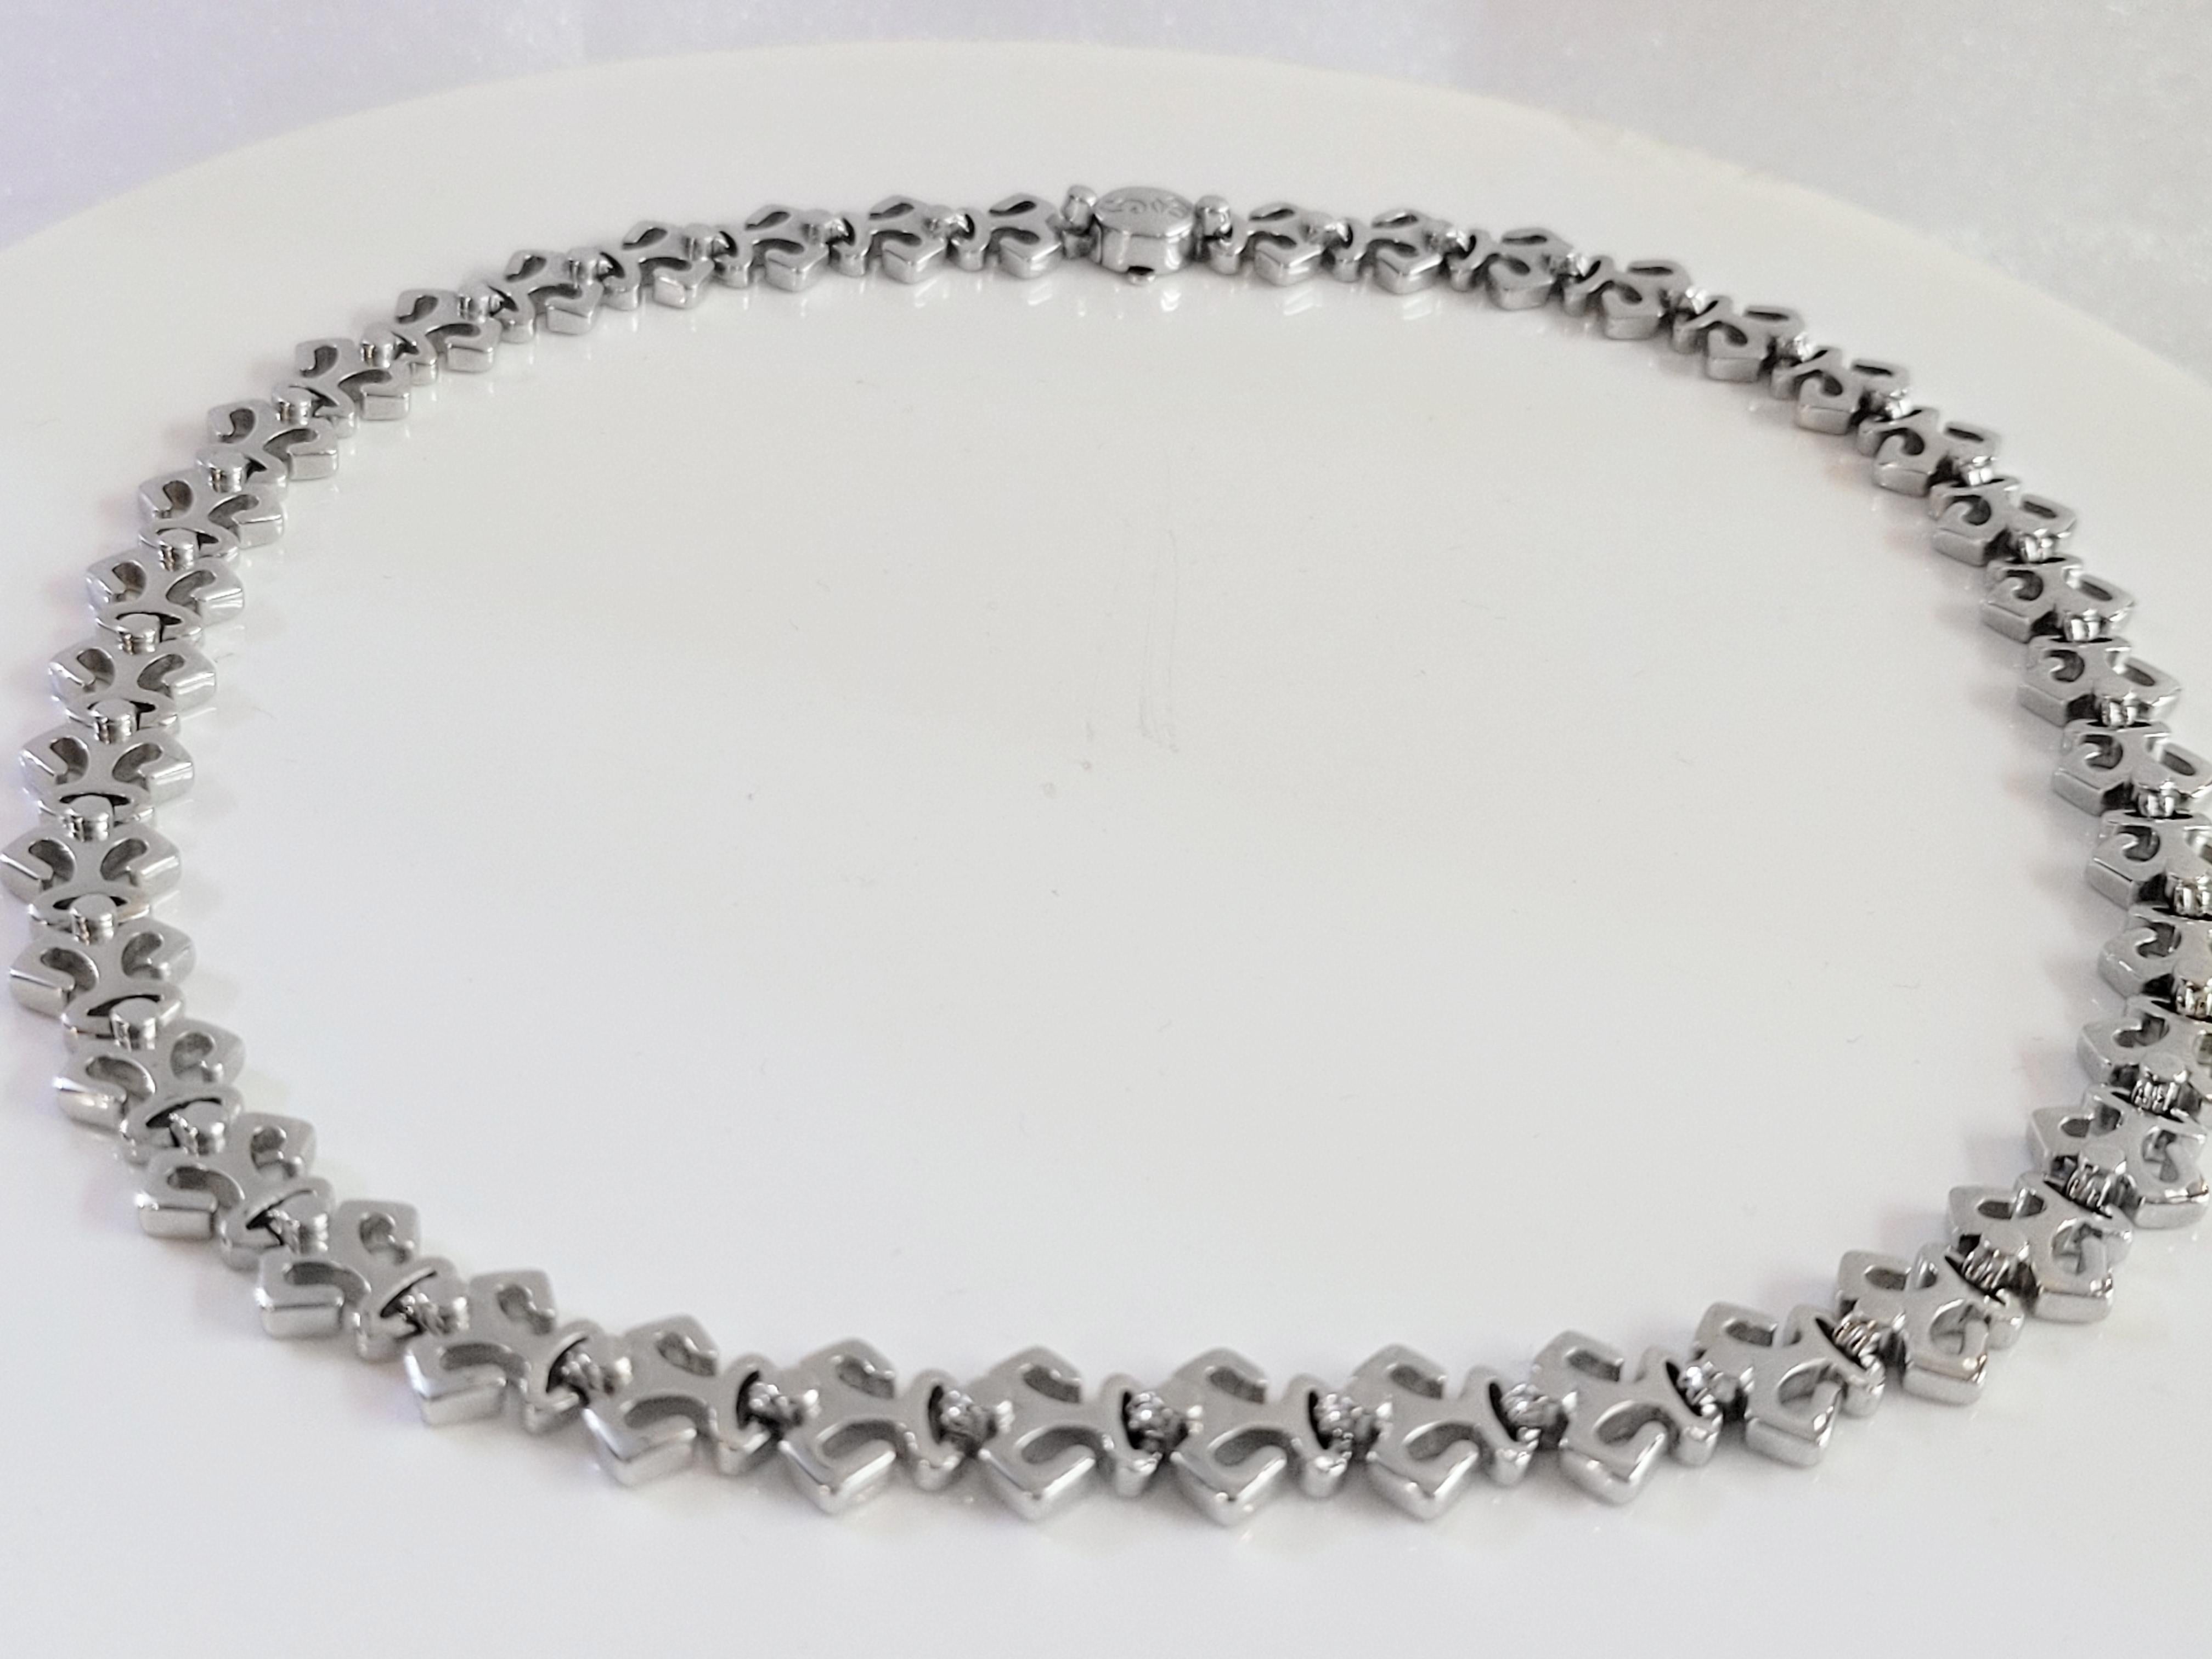 Garrard Necklace 16'' In Excellent Condition For Sale In New York, NY